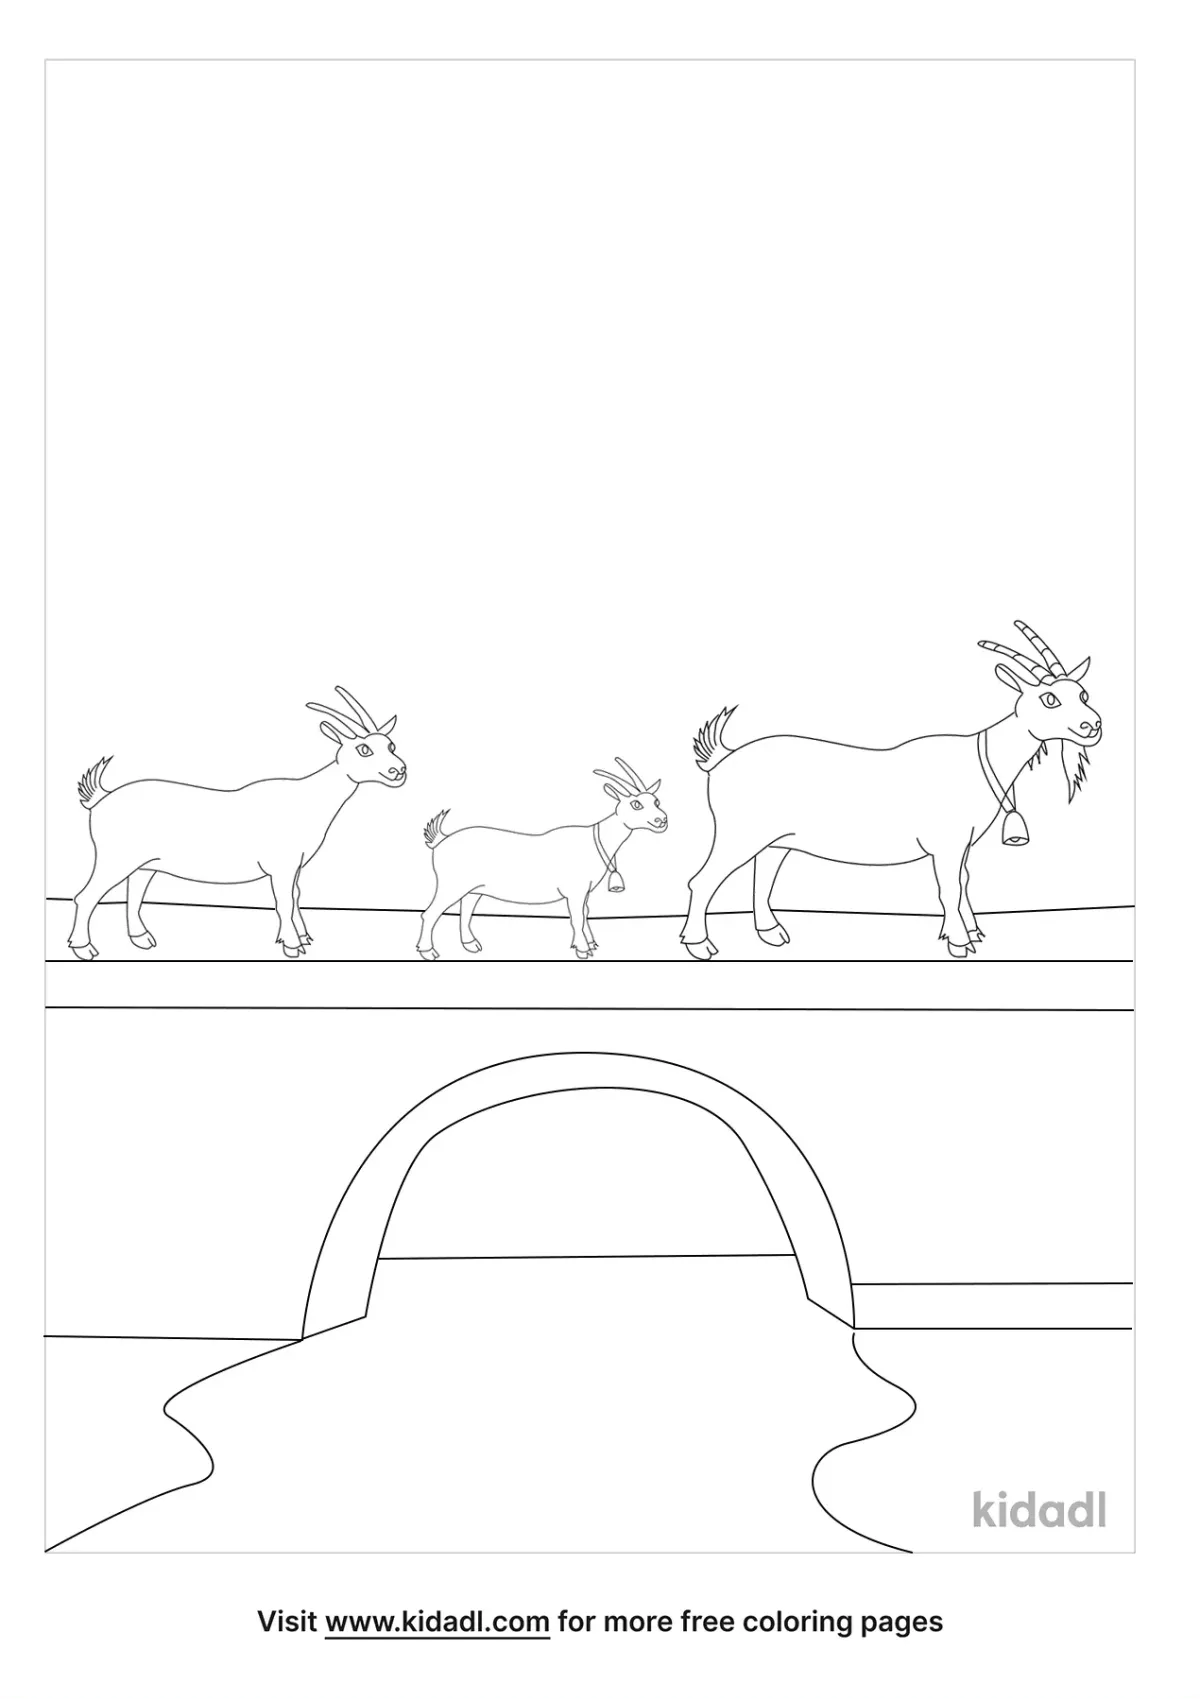 Three Billy Goats Gruff Coloring Page